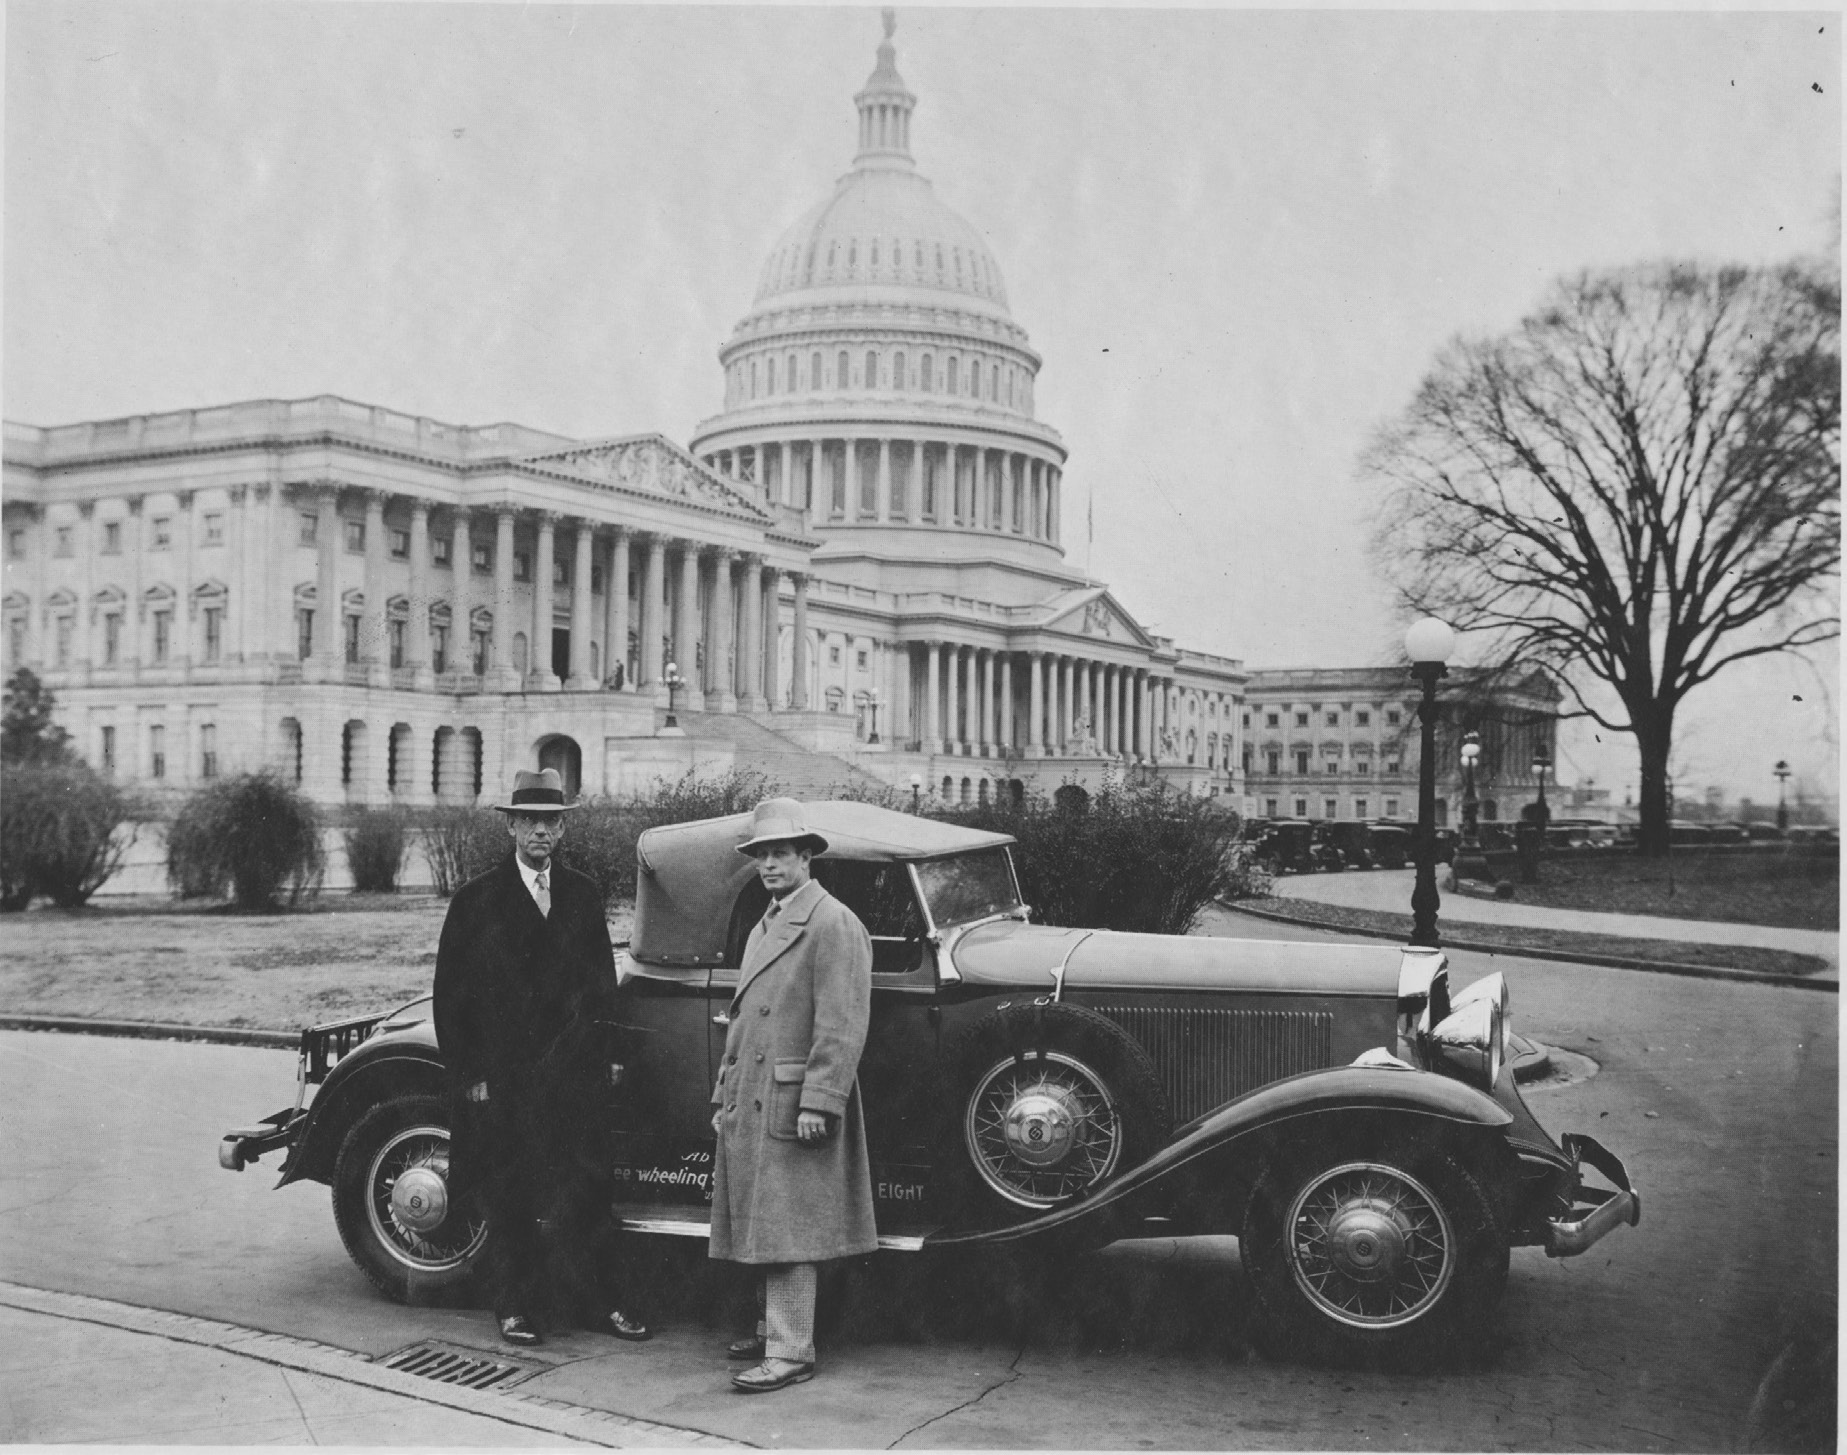 Senator Smoot (left) in front of the United States Capitol. Reed Smoot Papers, L. Tom Perry Special Collections, Harold B. Lee Library, Brigham Young University